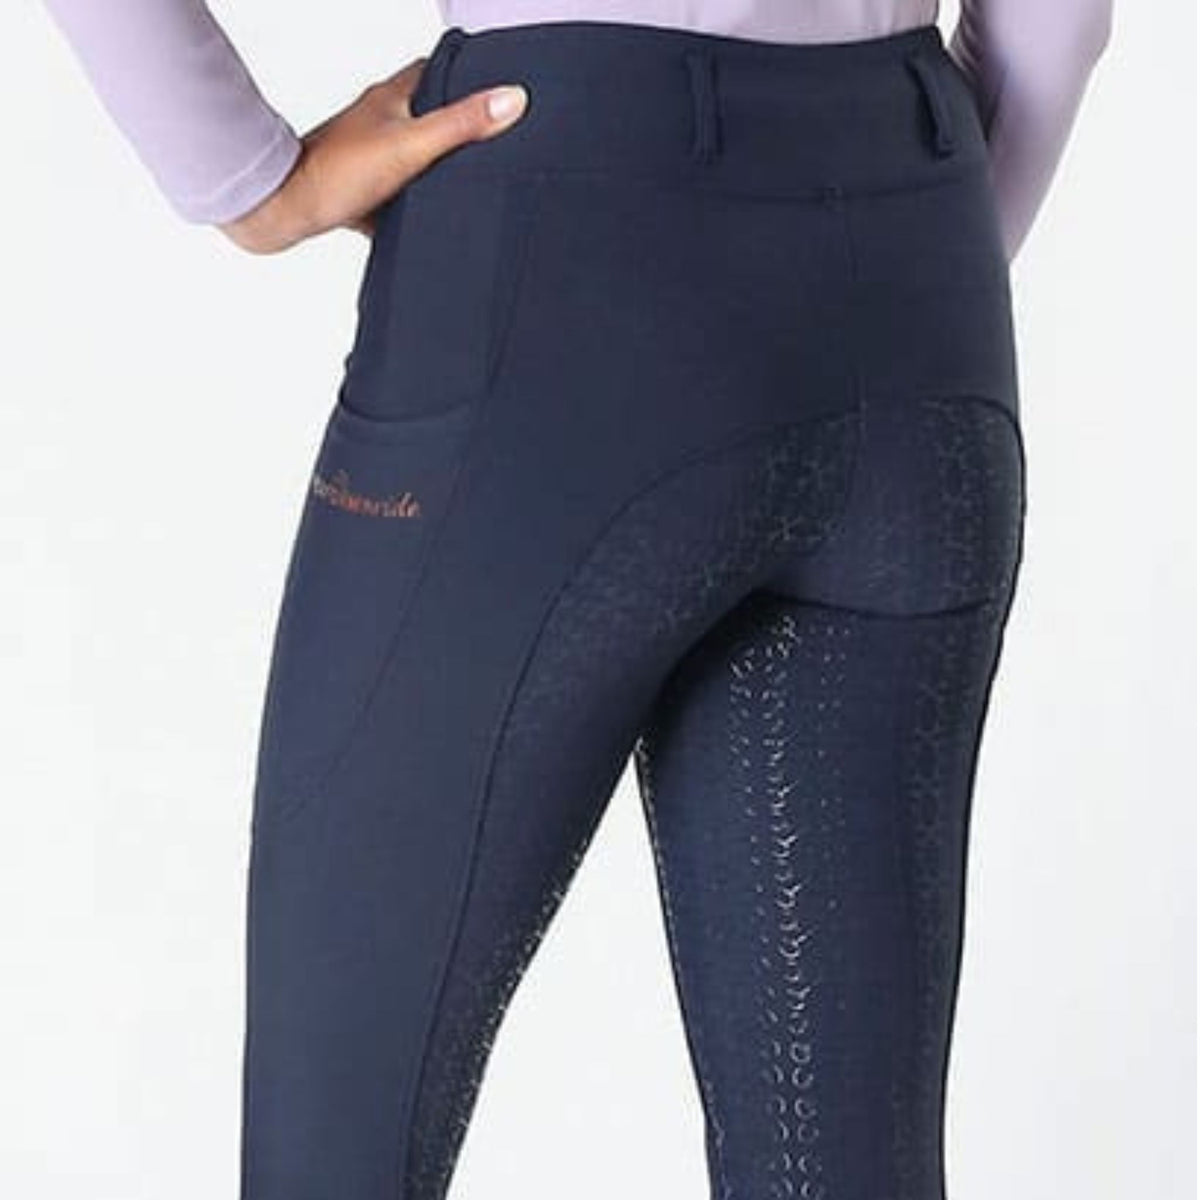 Back of navy riding tights with grip seat and belt loops.